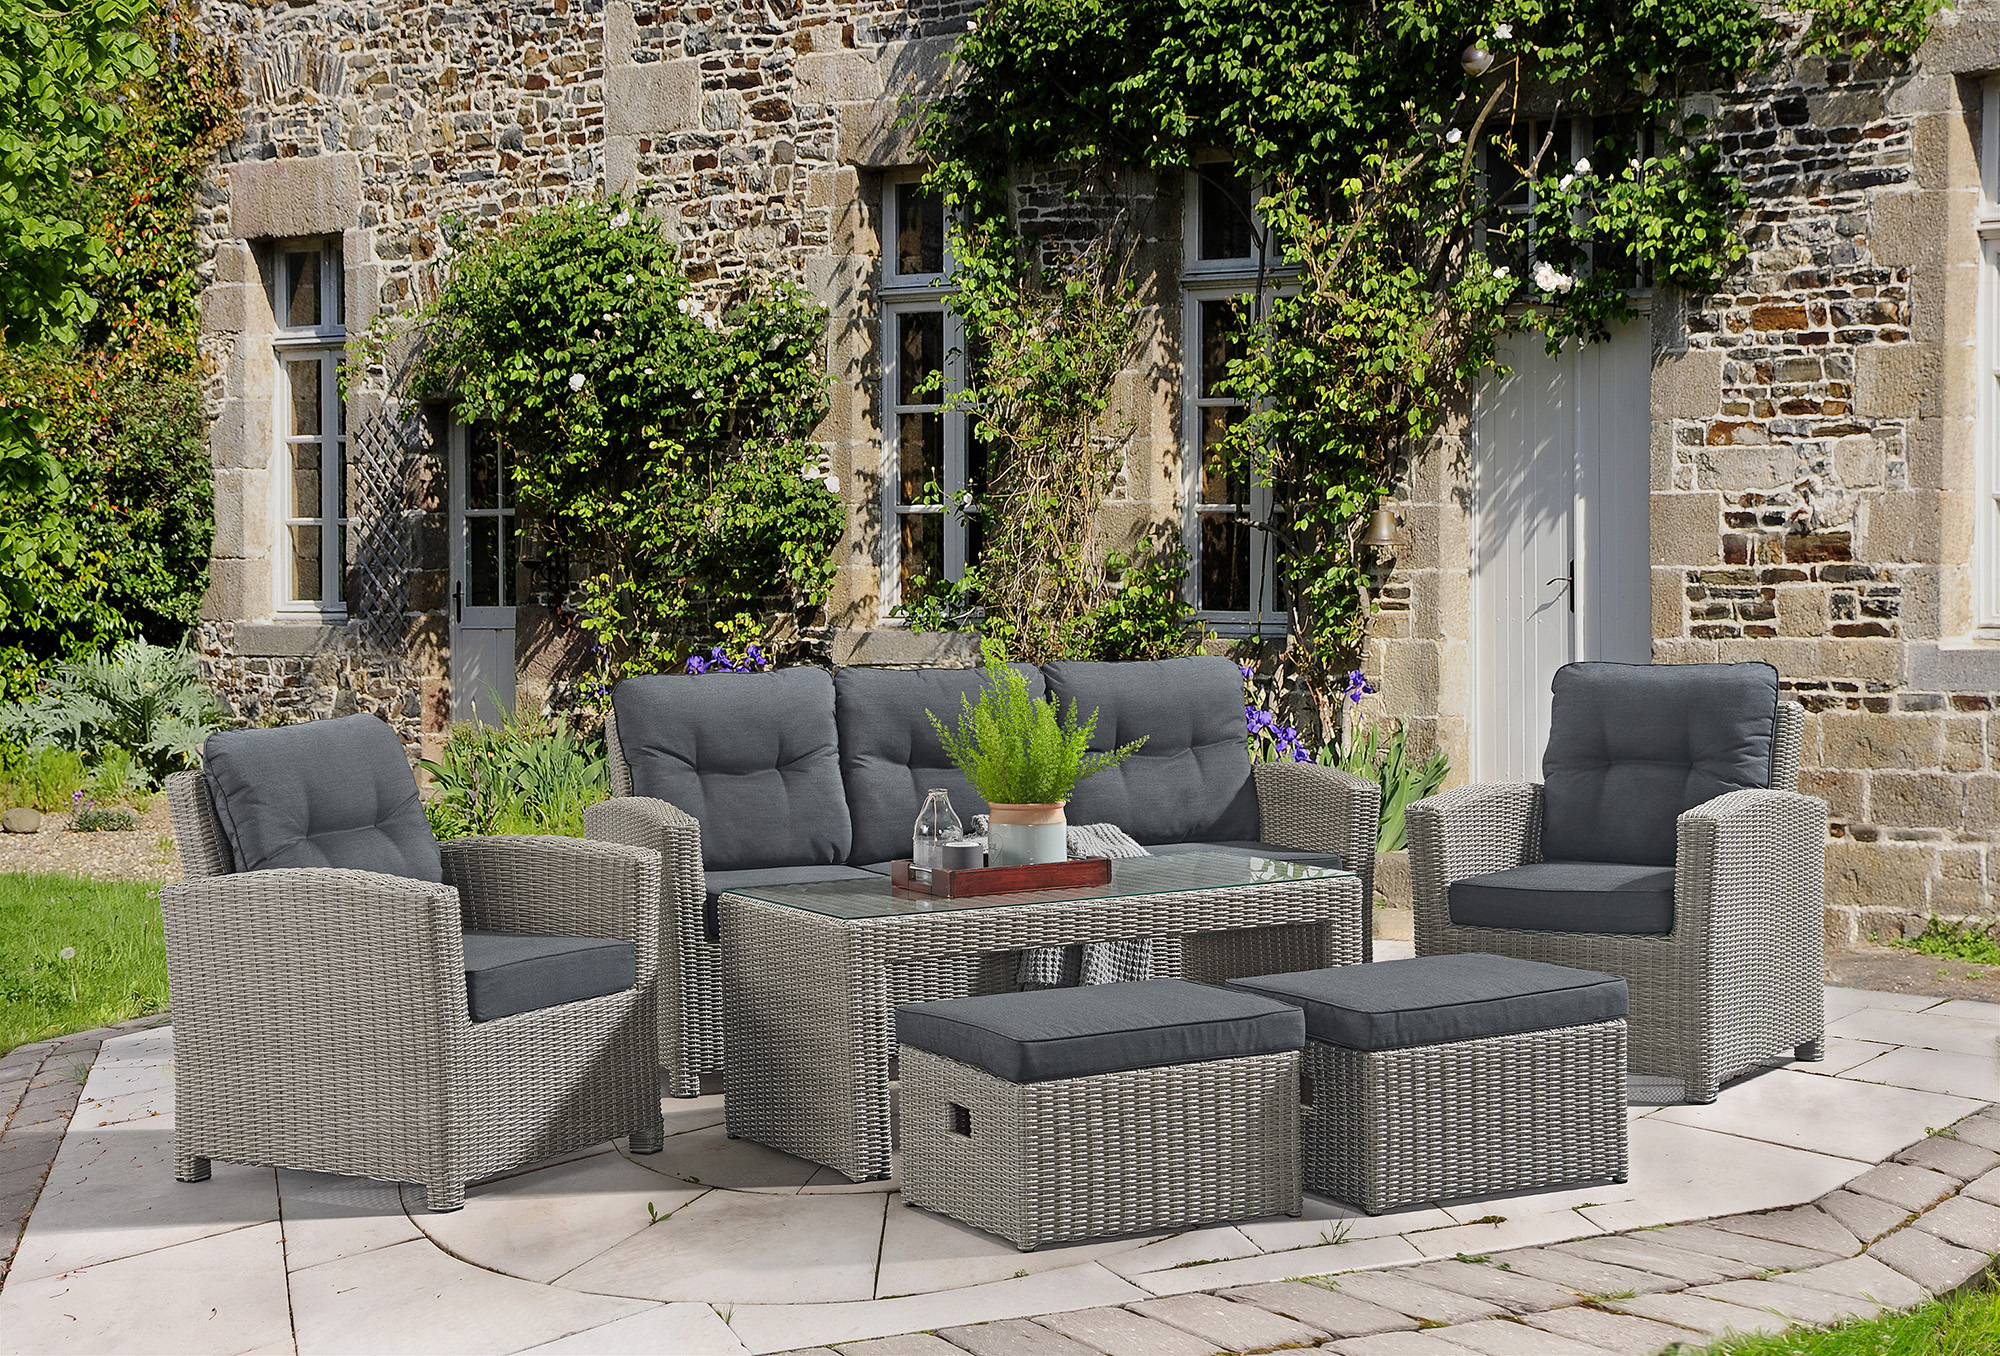 Outdoor Furniture Co